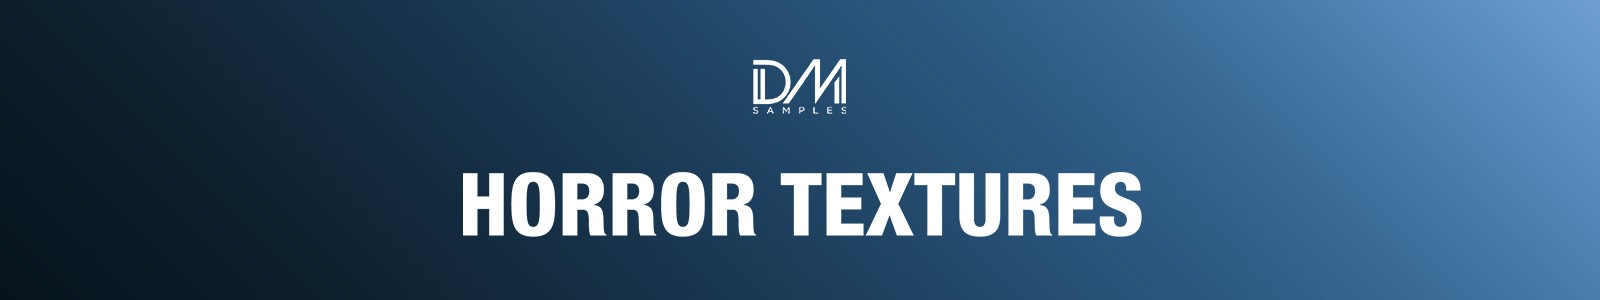 Horror Textures by DM Samples